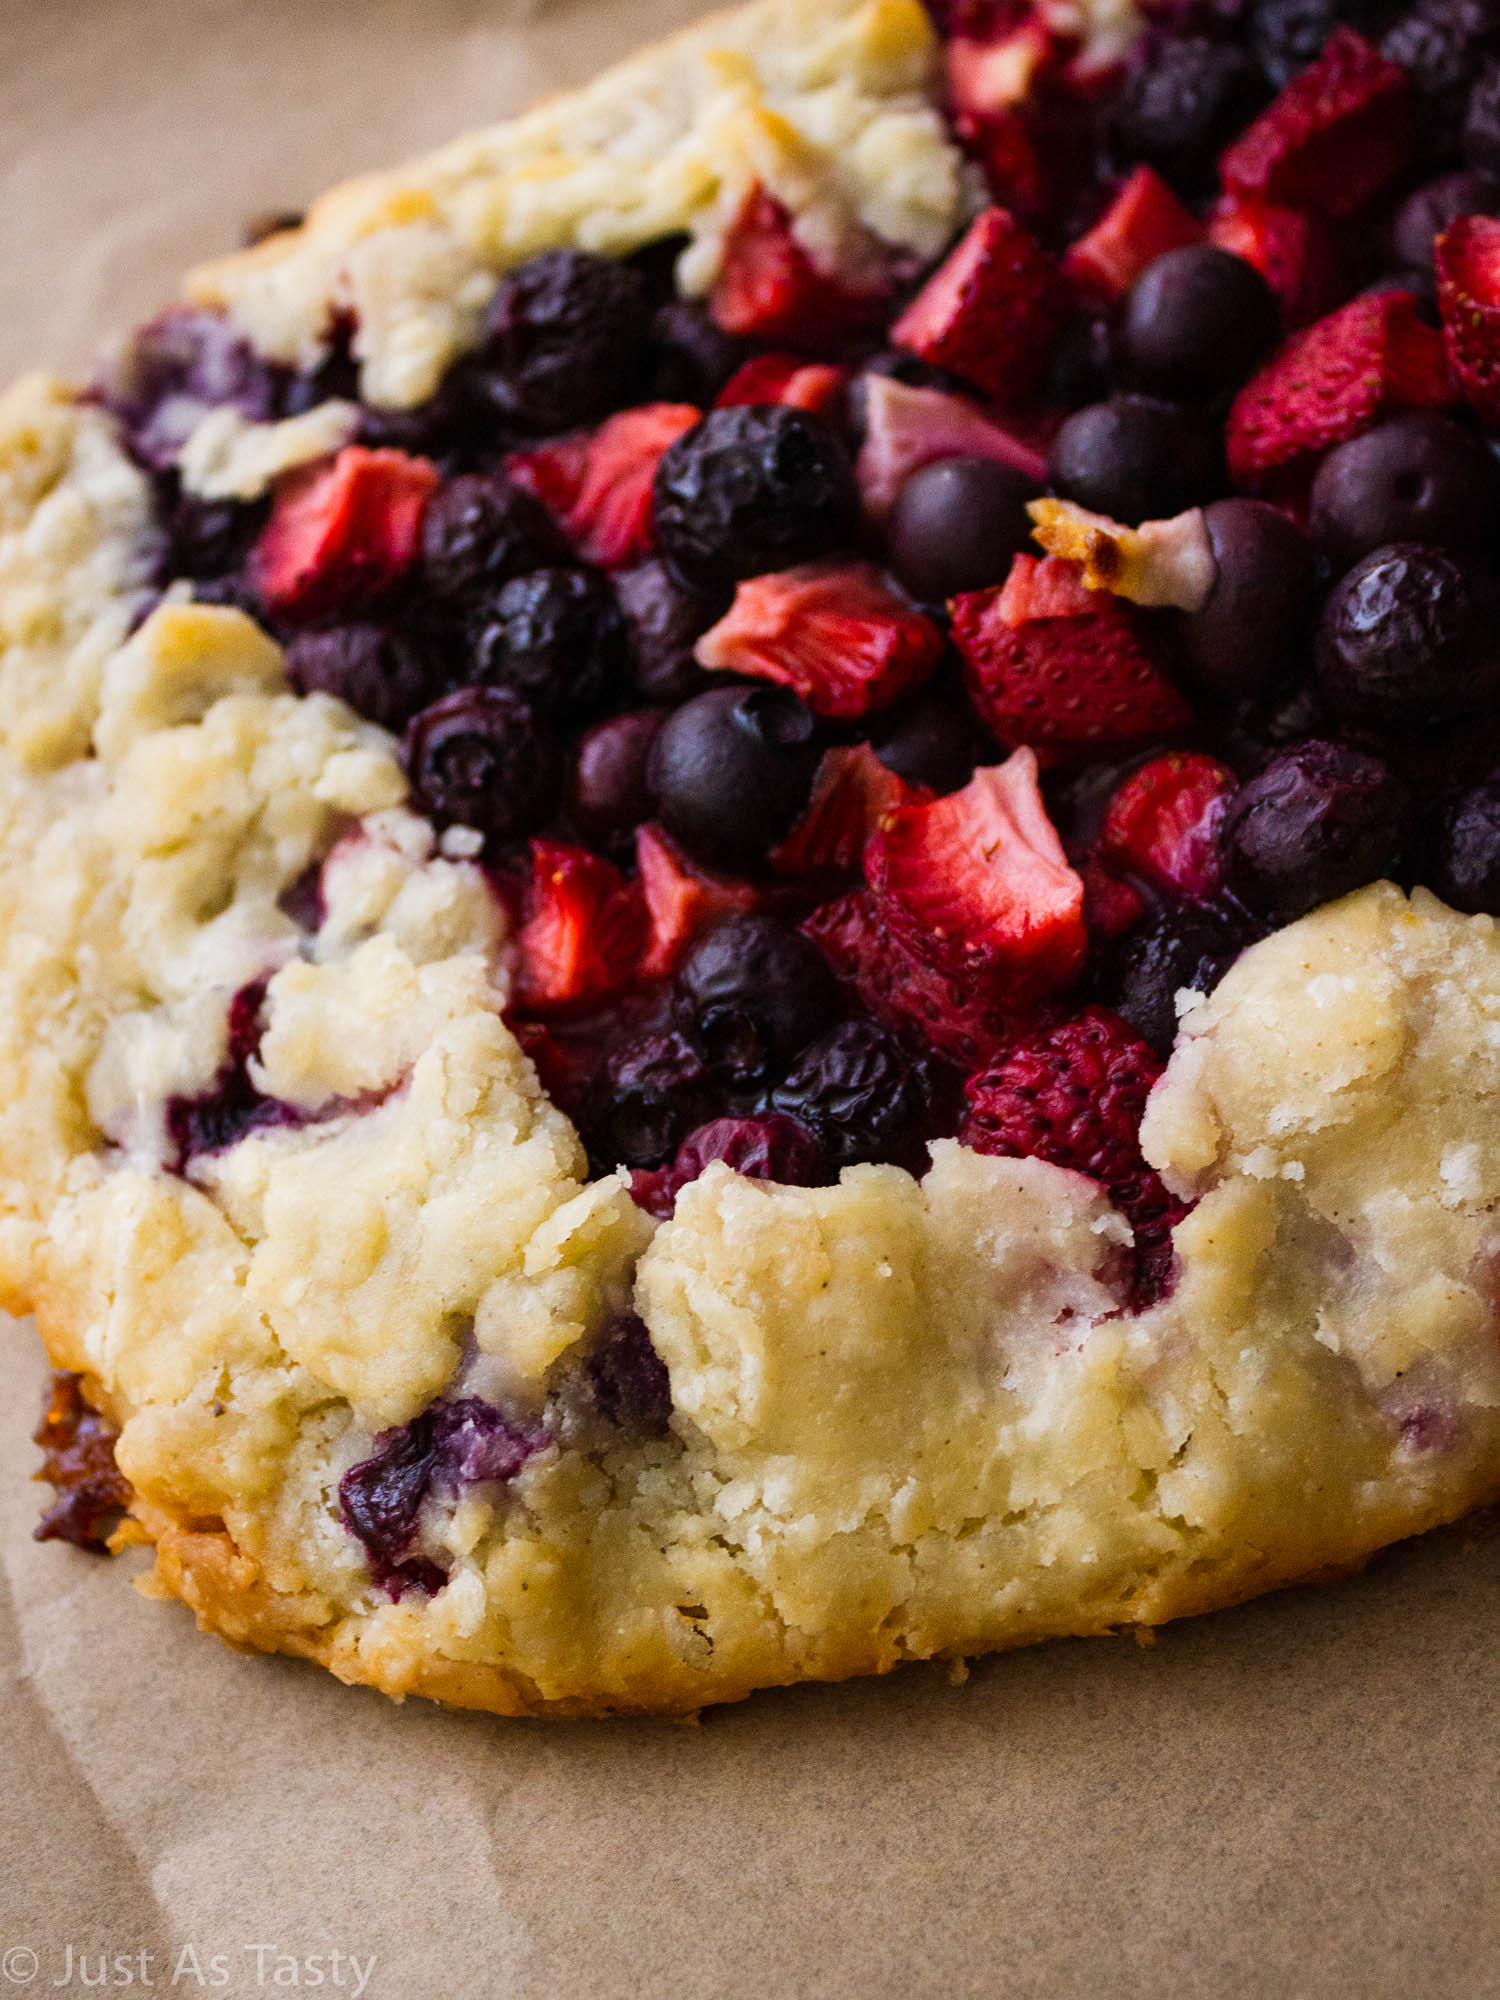 Close-up of a berry galette filled with strawberries and blueberries.